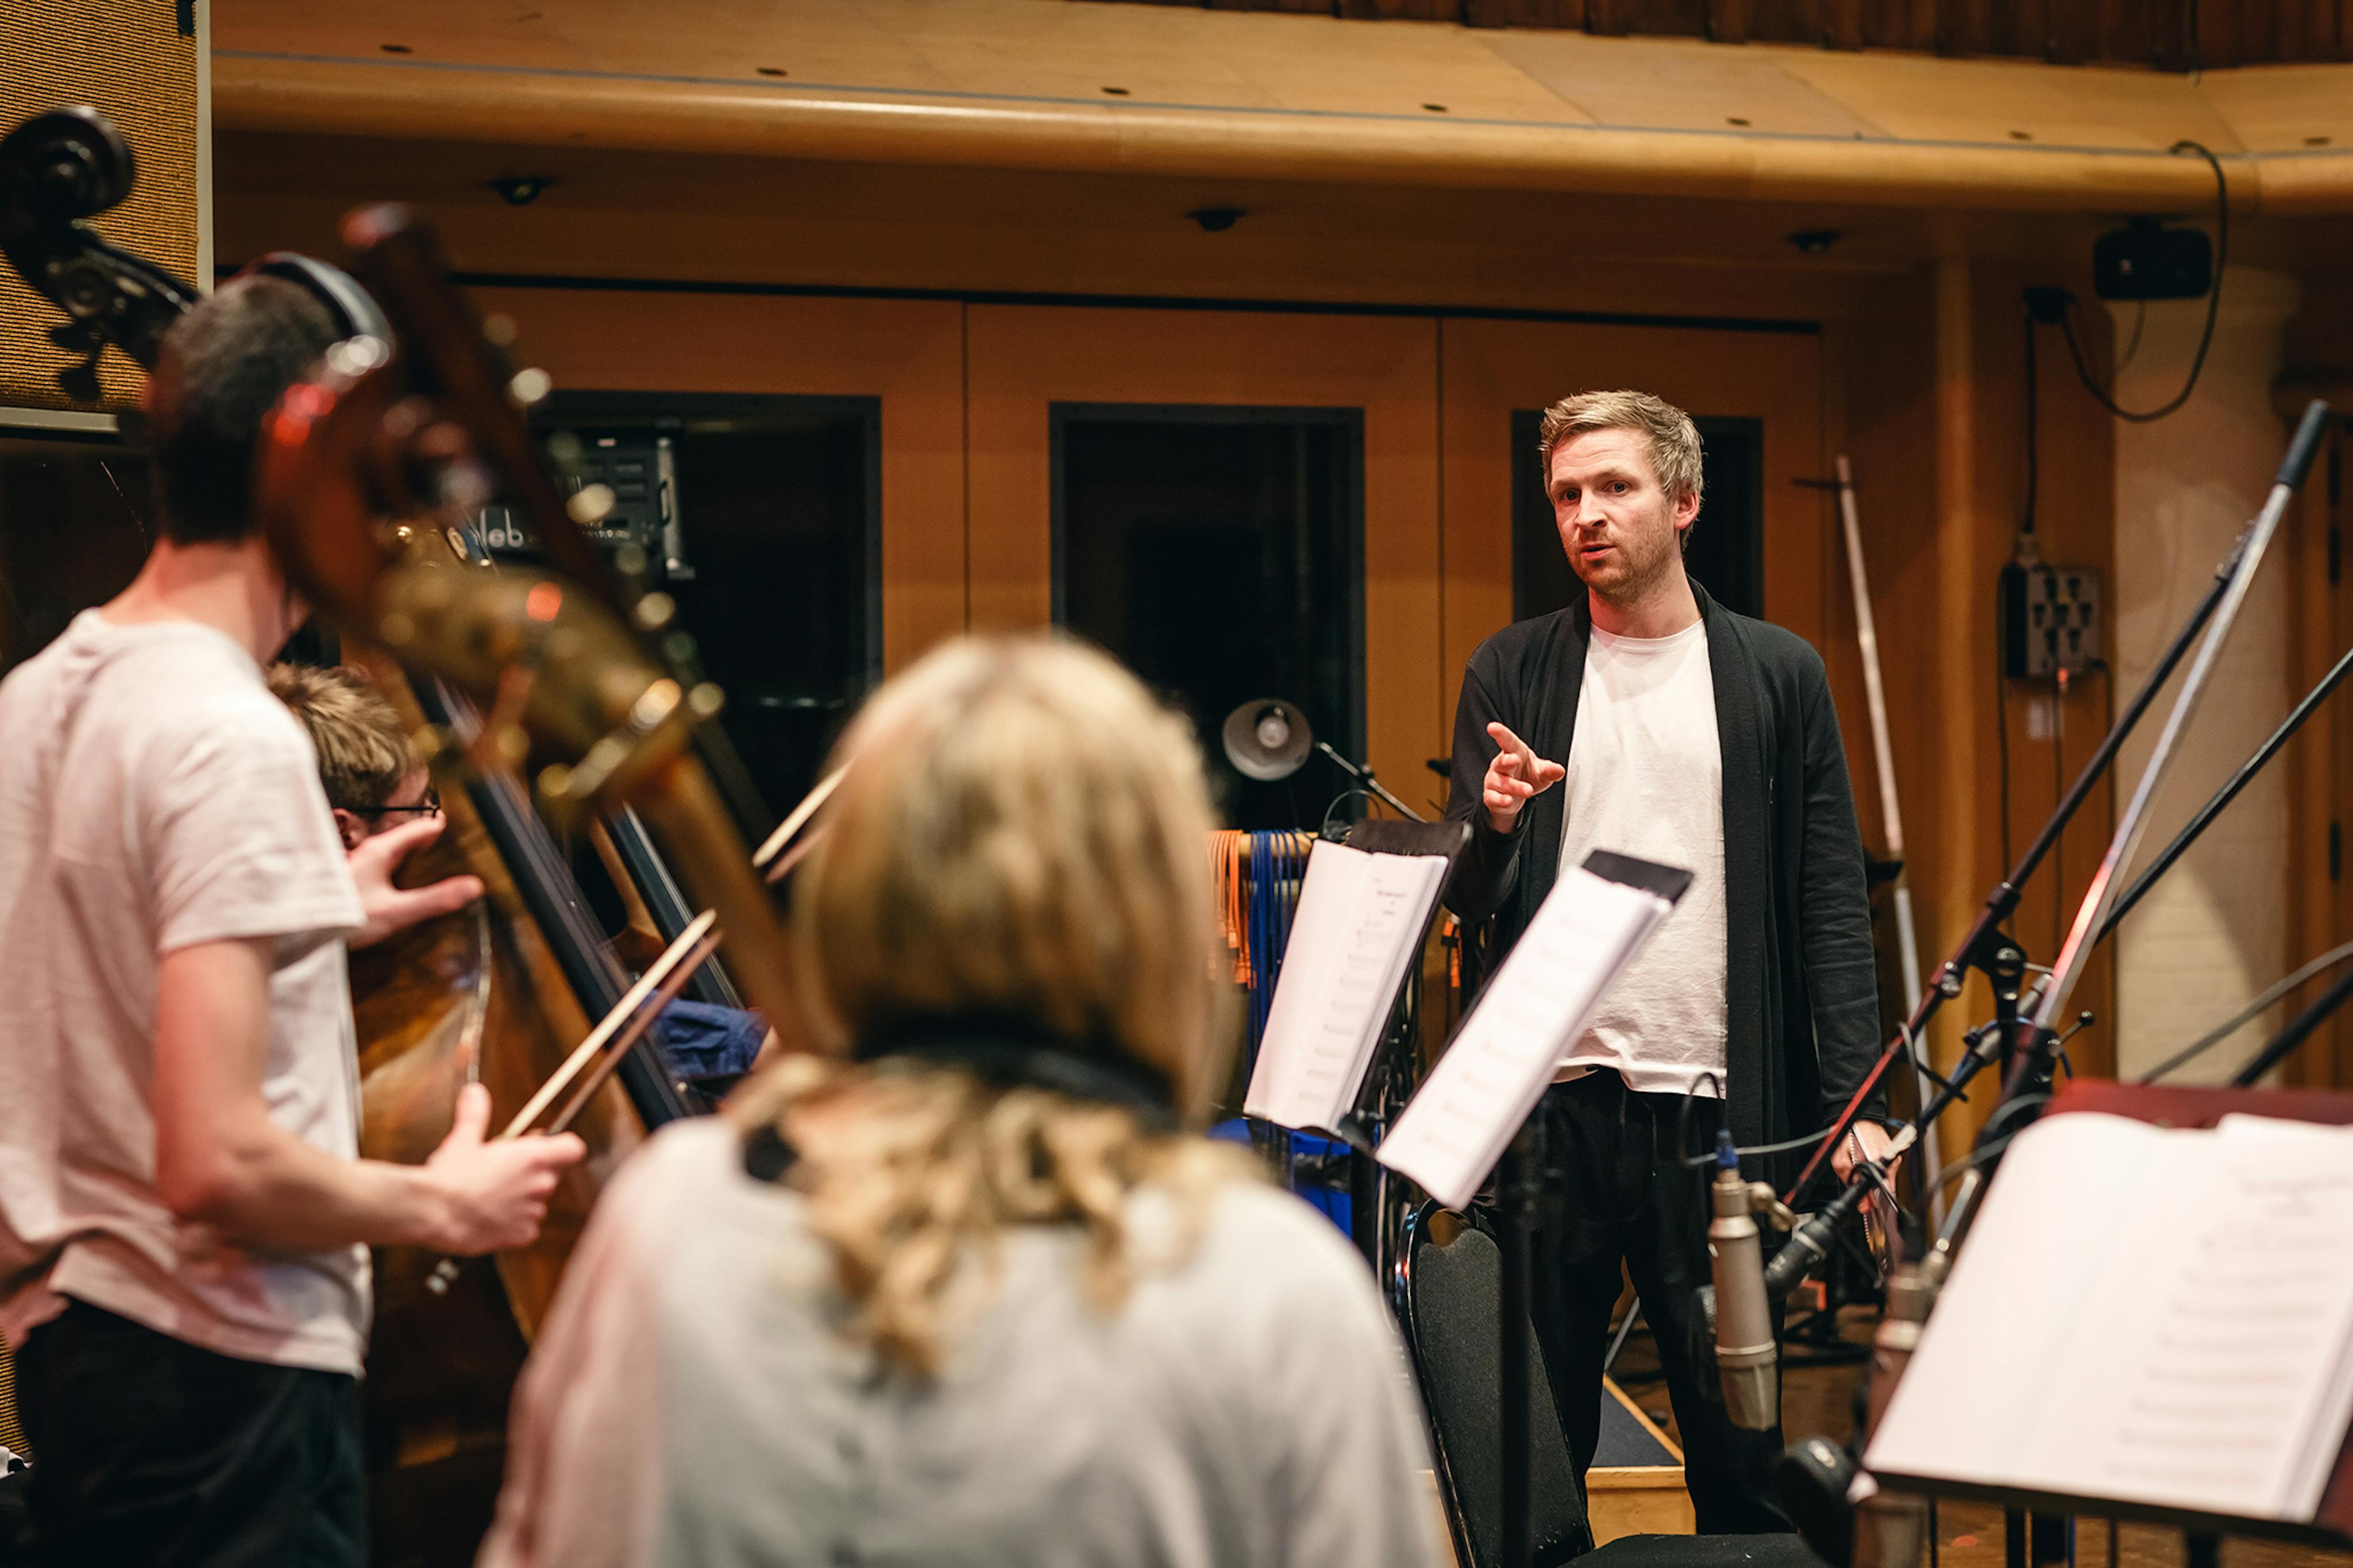 Olafur talking to the string players